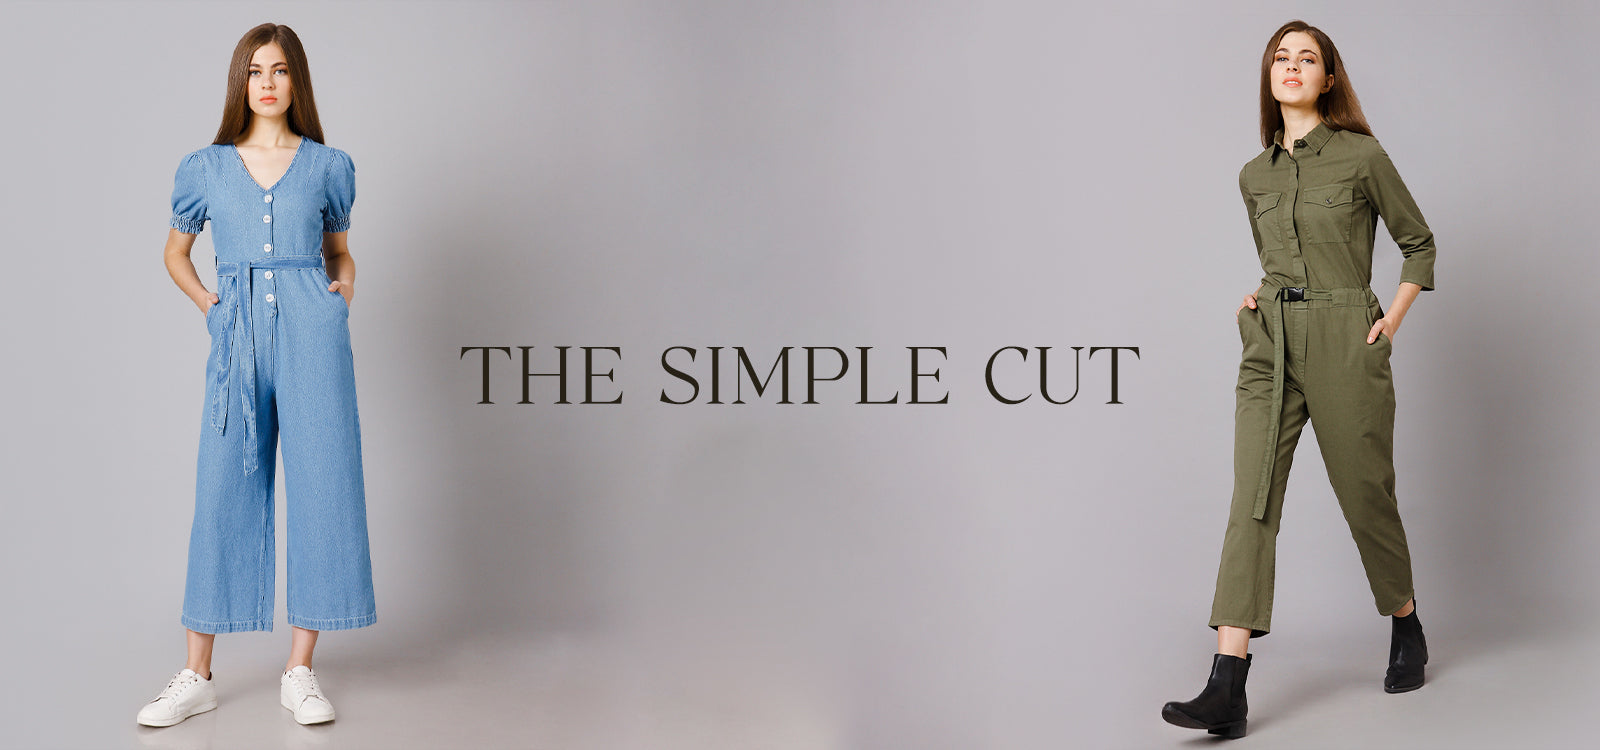 THE SIMPLE CUT